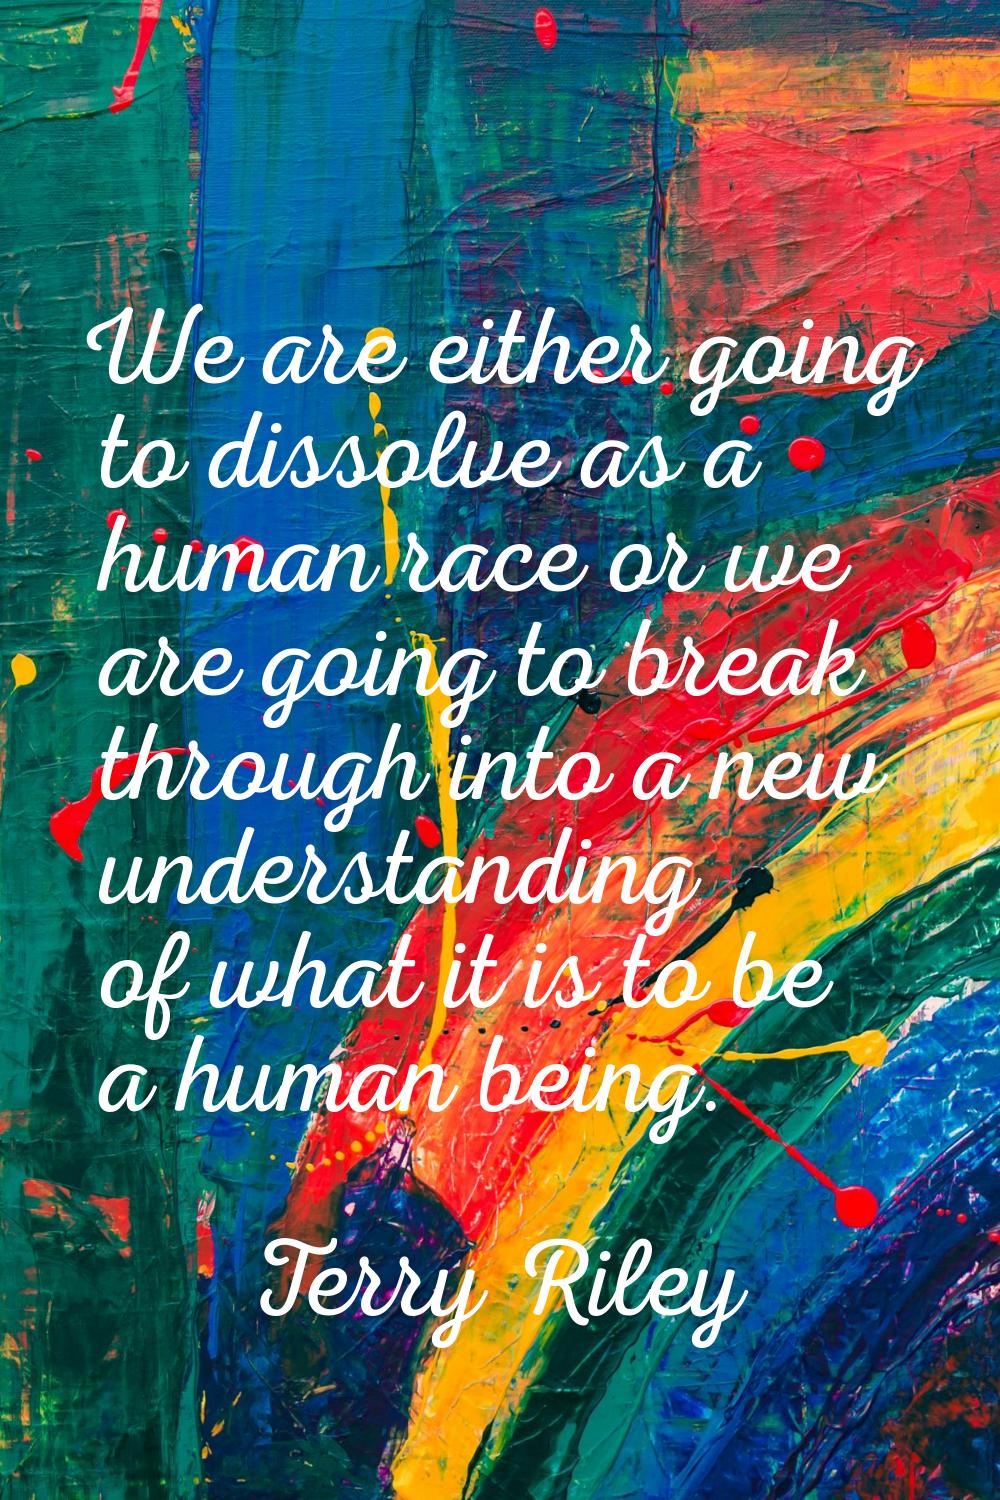 We are either going to dissolve as a human race or we are going to break through into a new underst